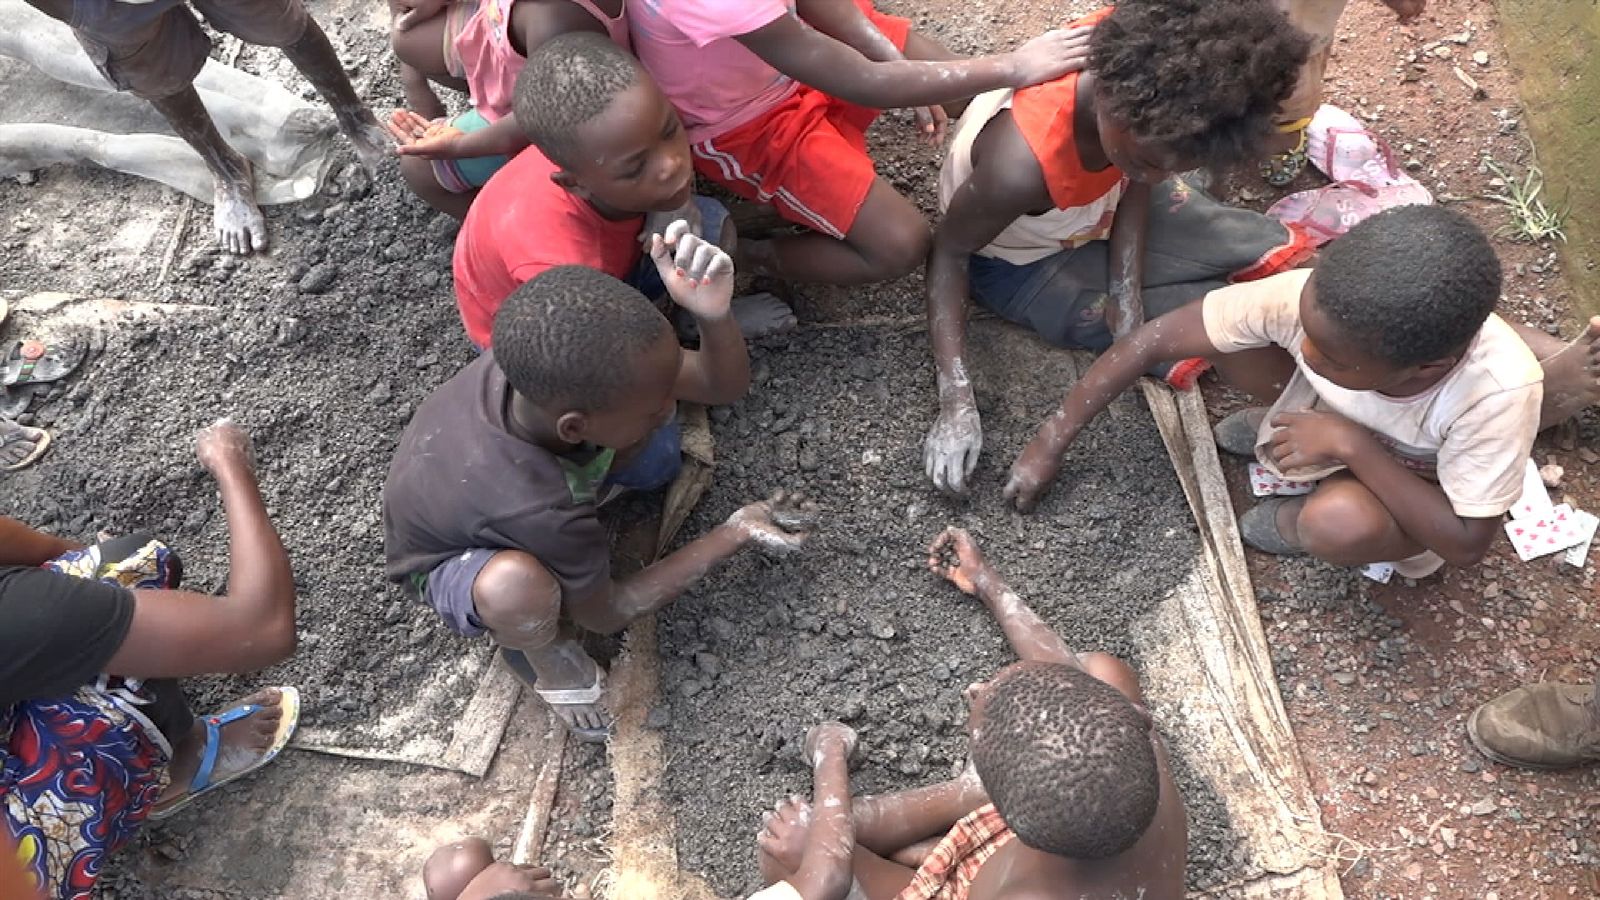 Read more about the article Behind the Horrors of Congo’s Cobalt Mining